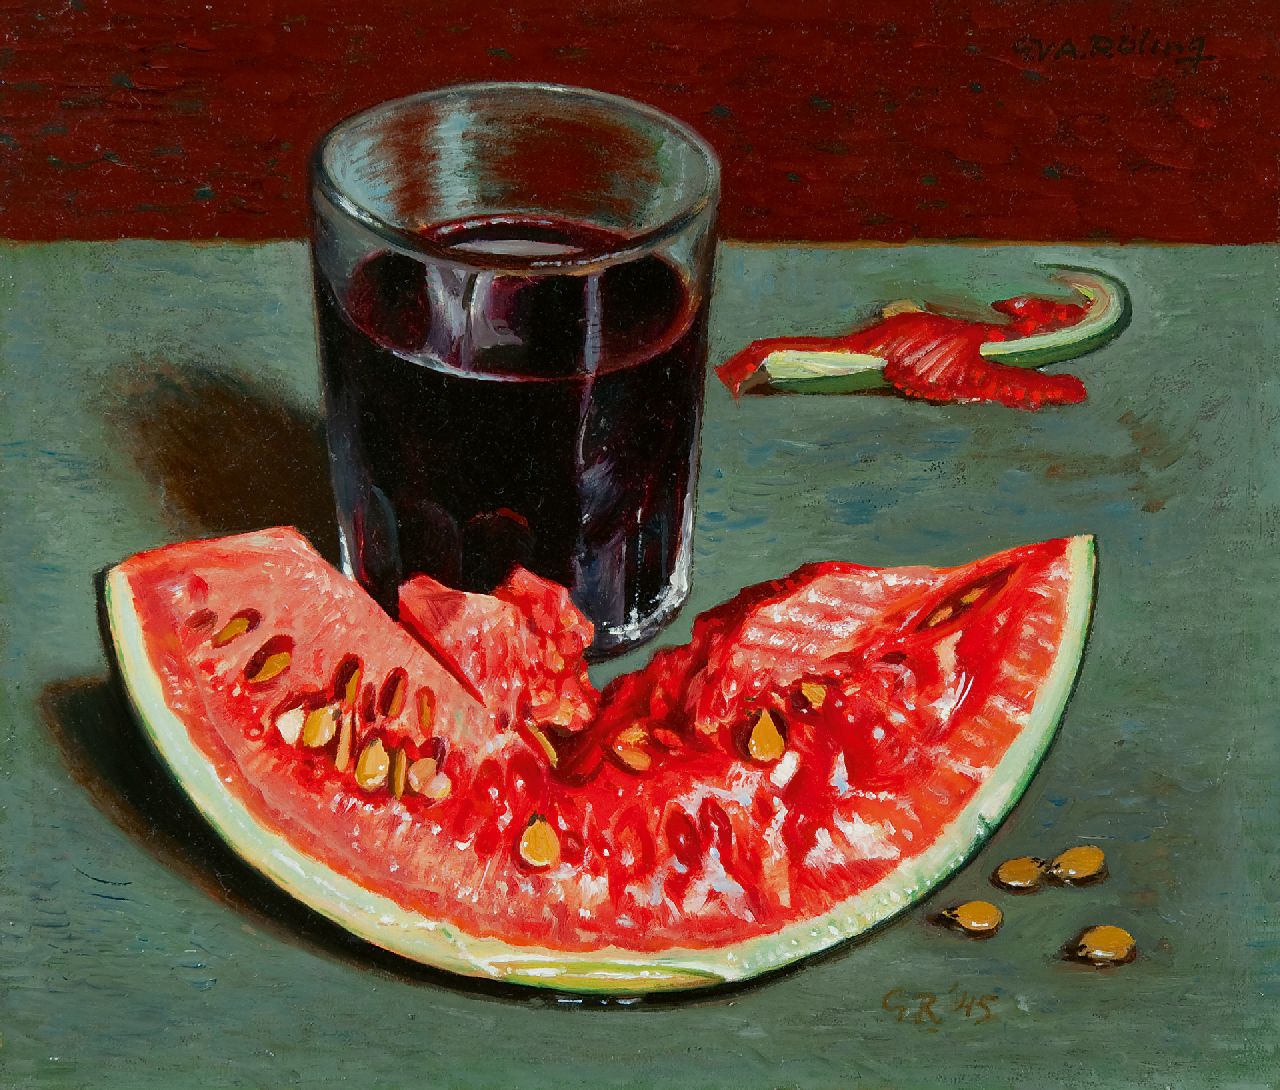 Röling G.V.A.  | Gerard Victor Alphons Röling | Paintings offered for sale | A still life with watermelon, oil on board 22.7 x 26.4 cm, signed l.r. with initials and dated '45